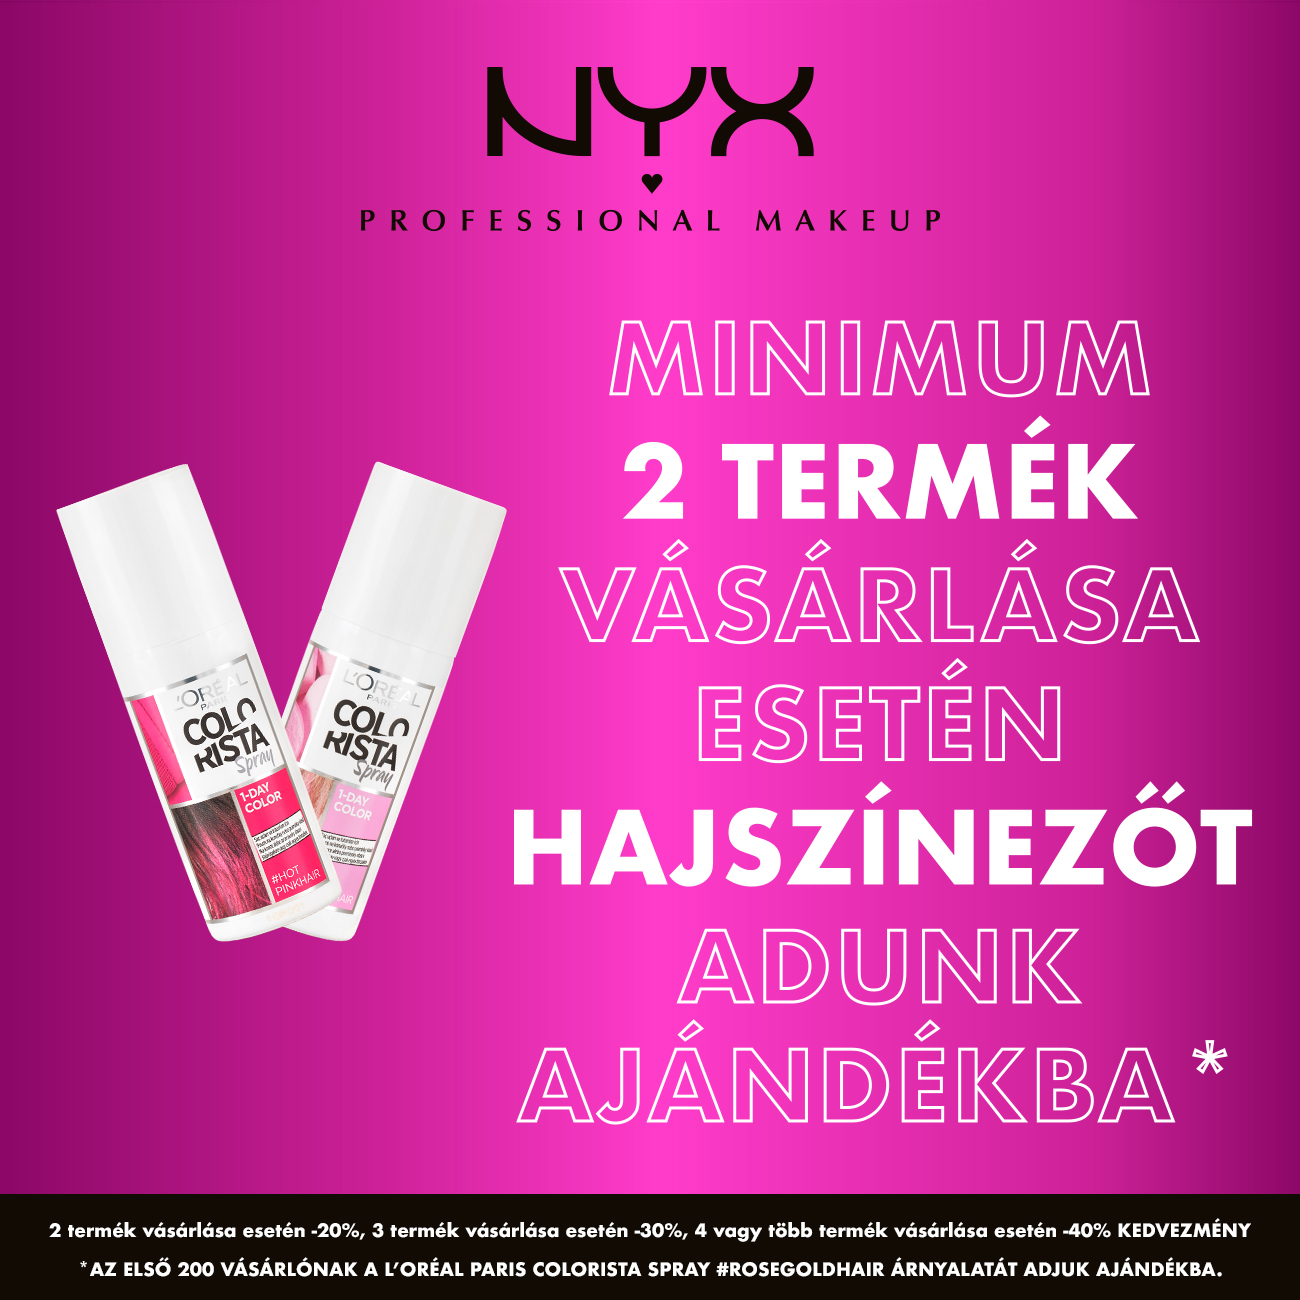 Keresd a NYX Professional kupont a Westend appban!